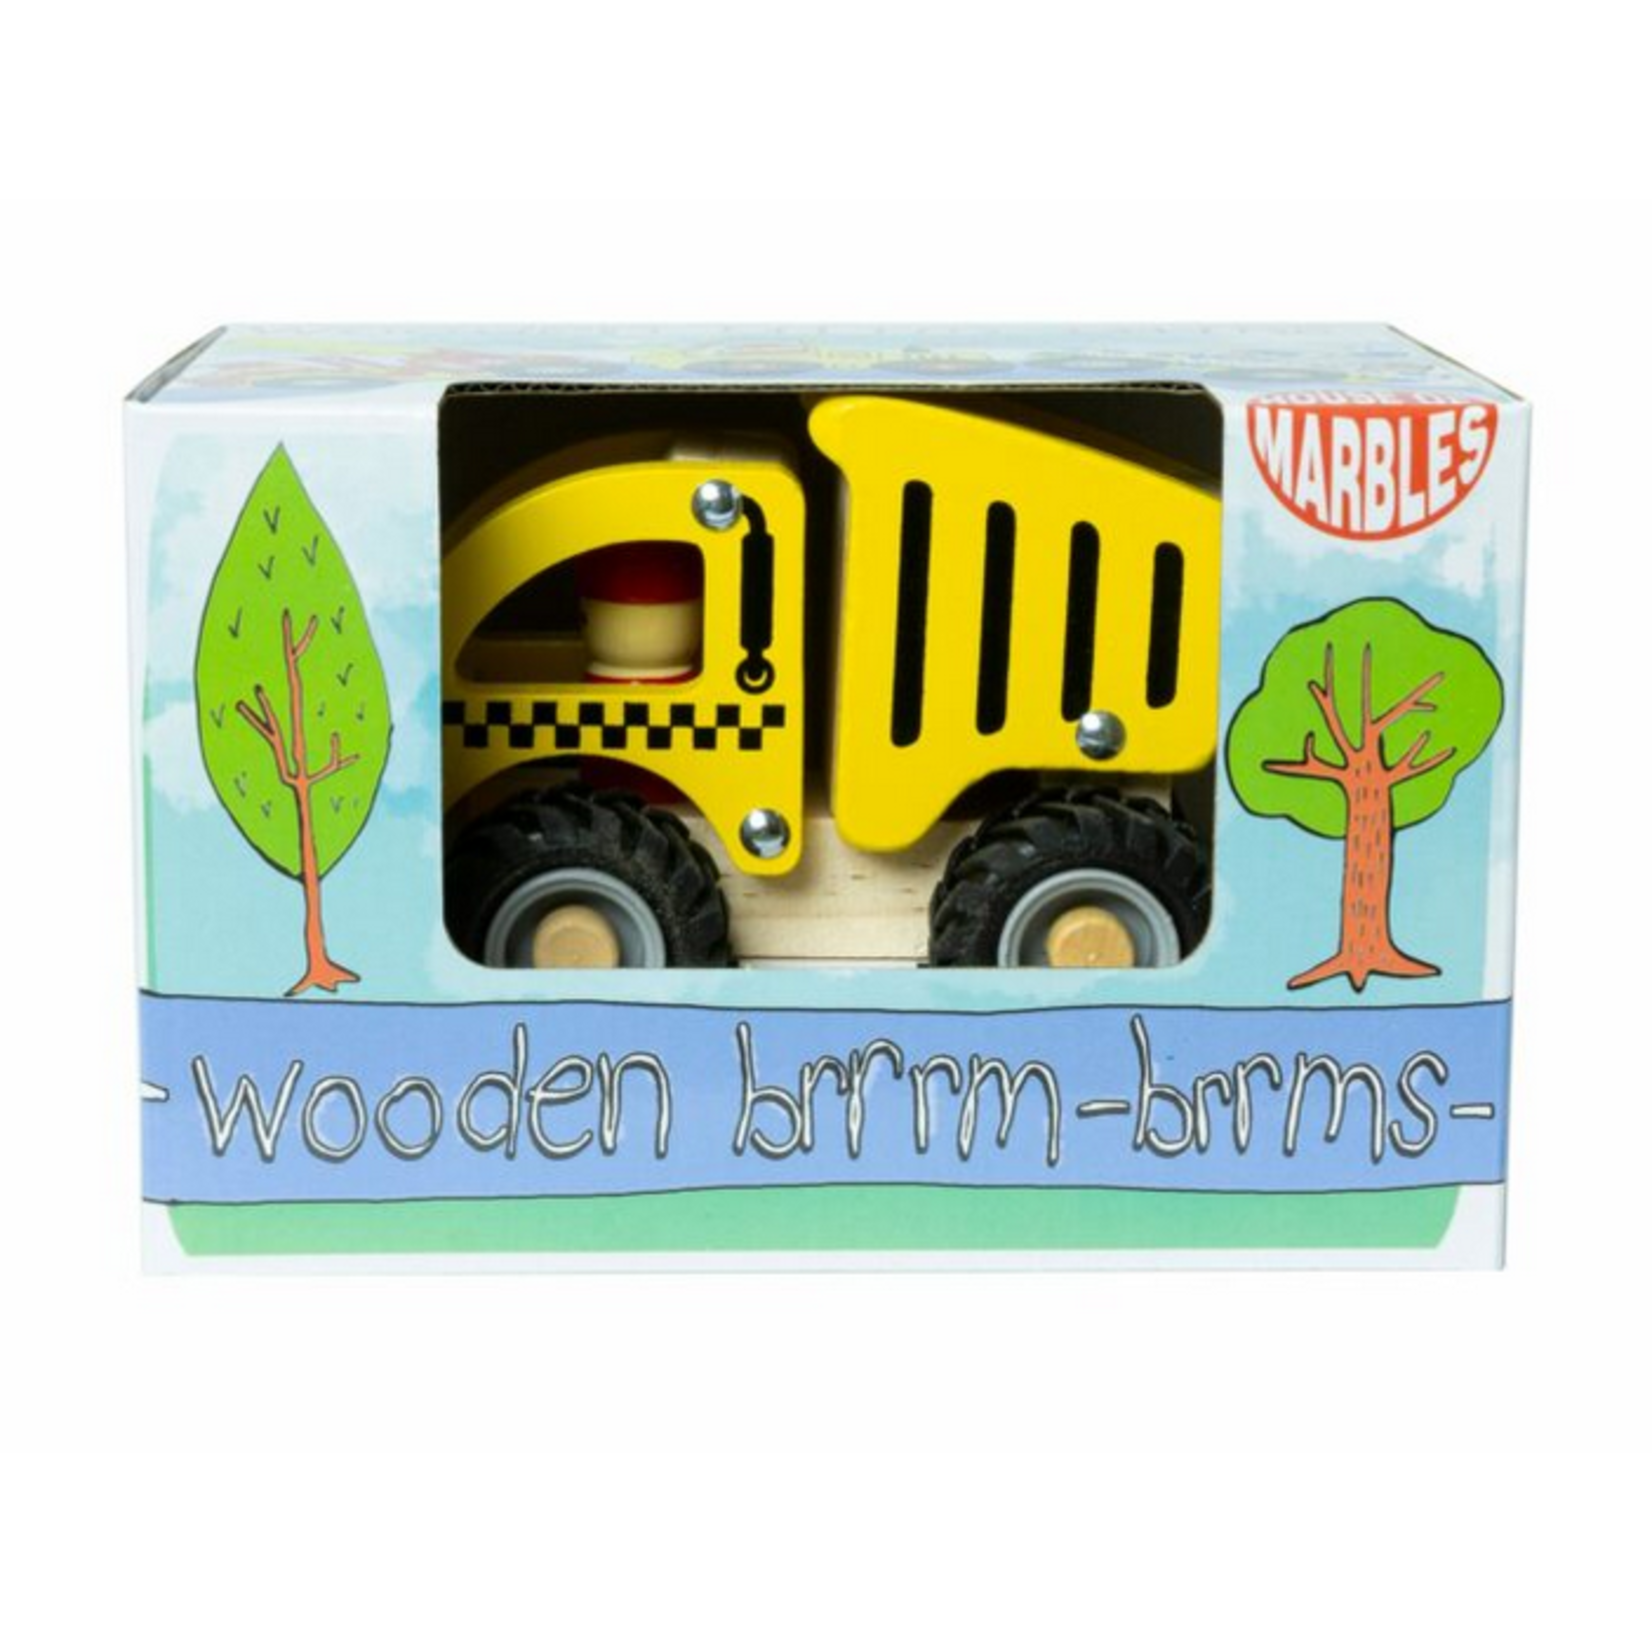 HOUSE OF MARBLES Wooden Construction Vehicle